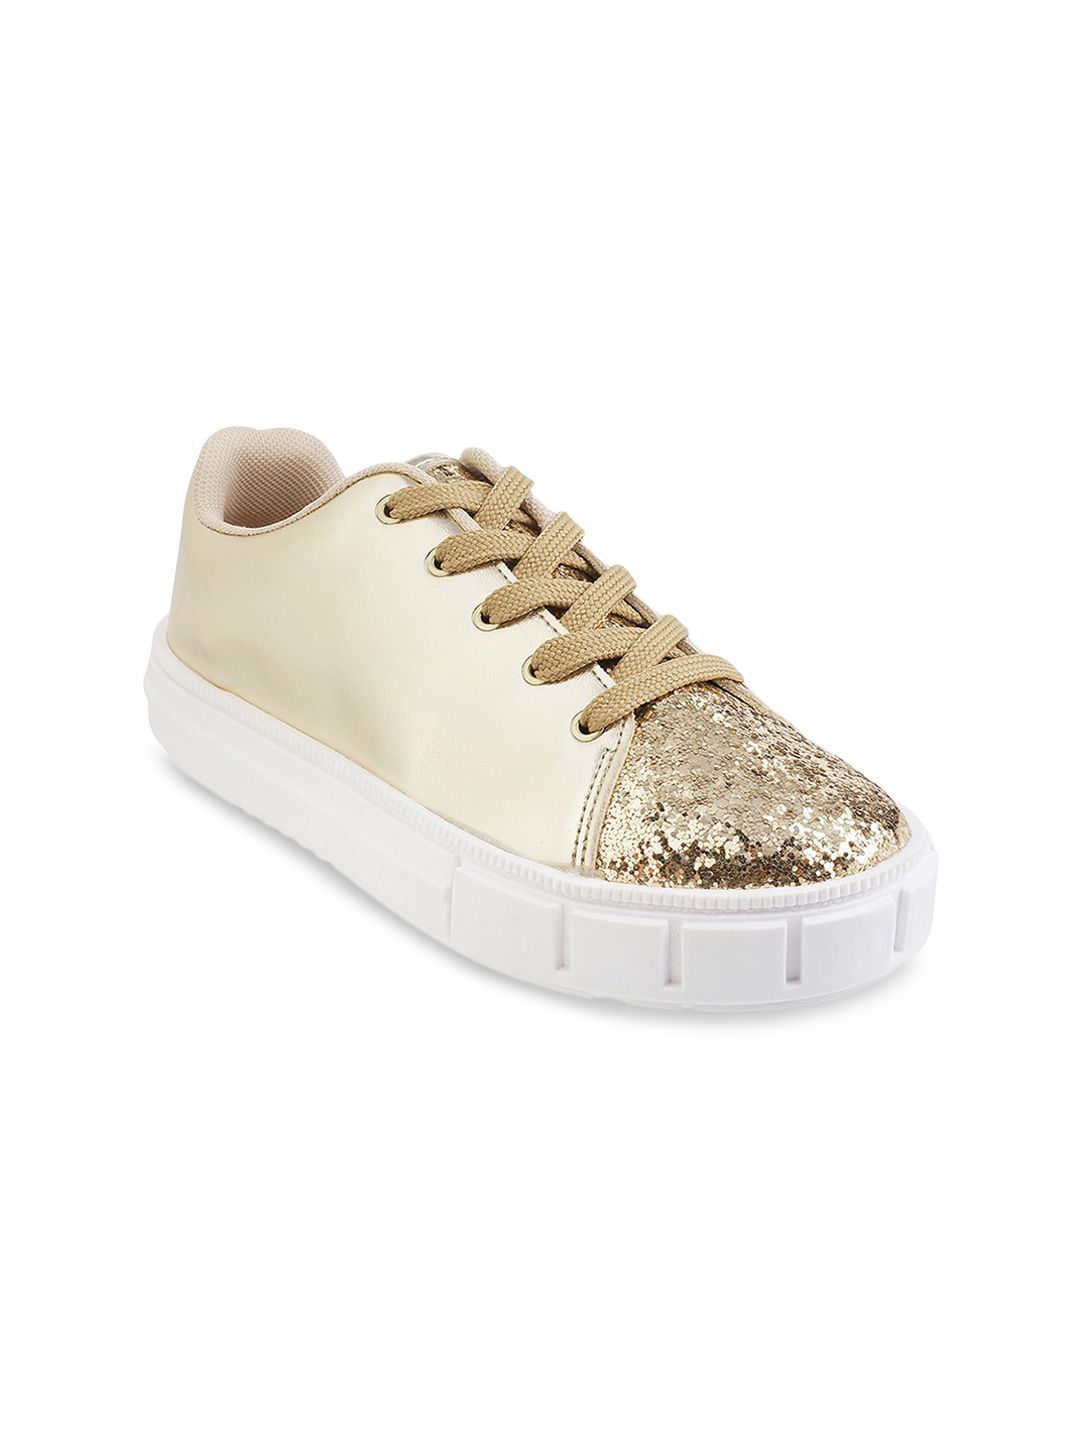 Mochi Women Gold-Toned Colourblocked Lace-Up Sneakers Price in India